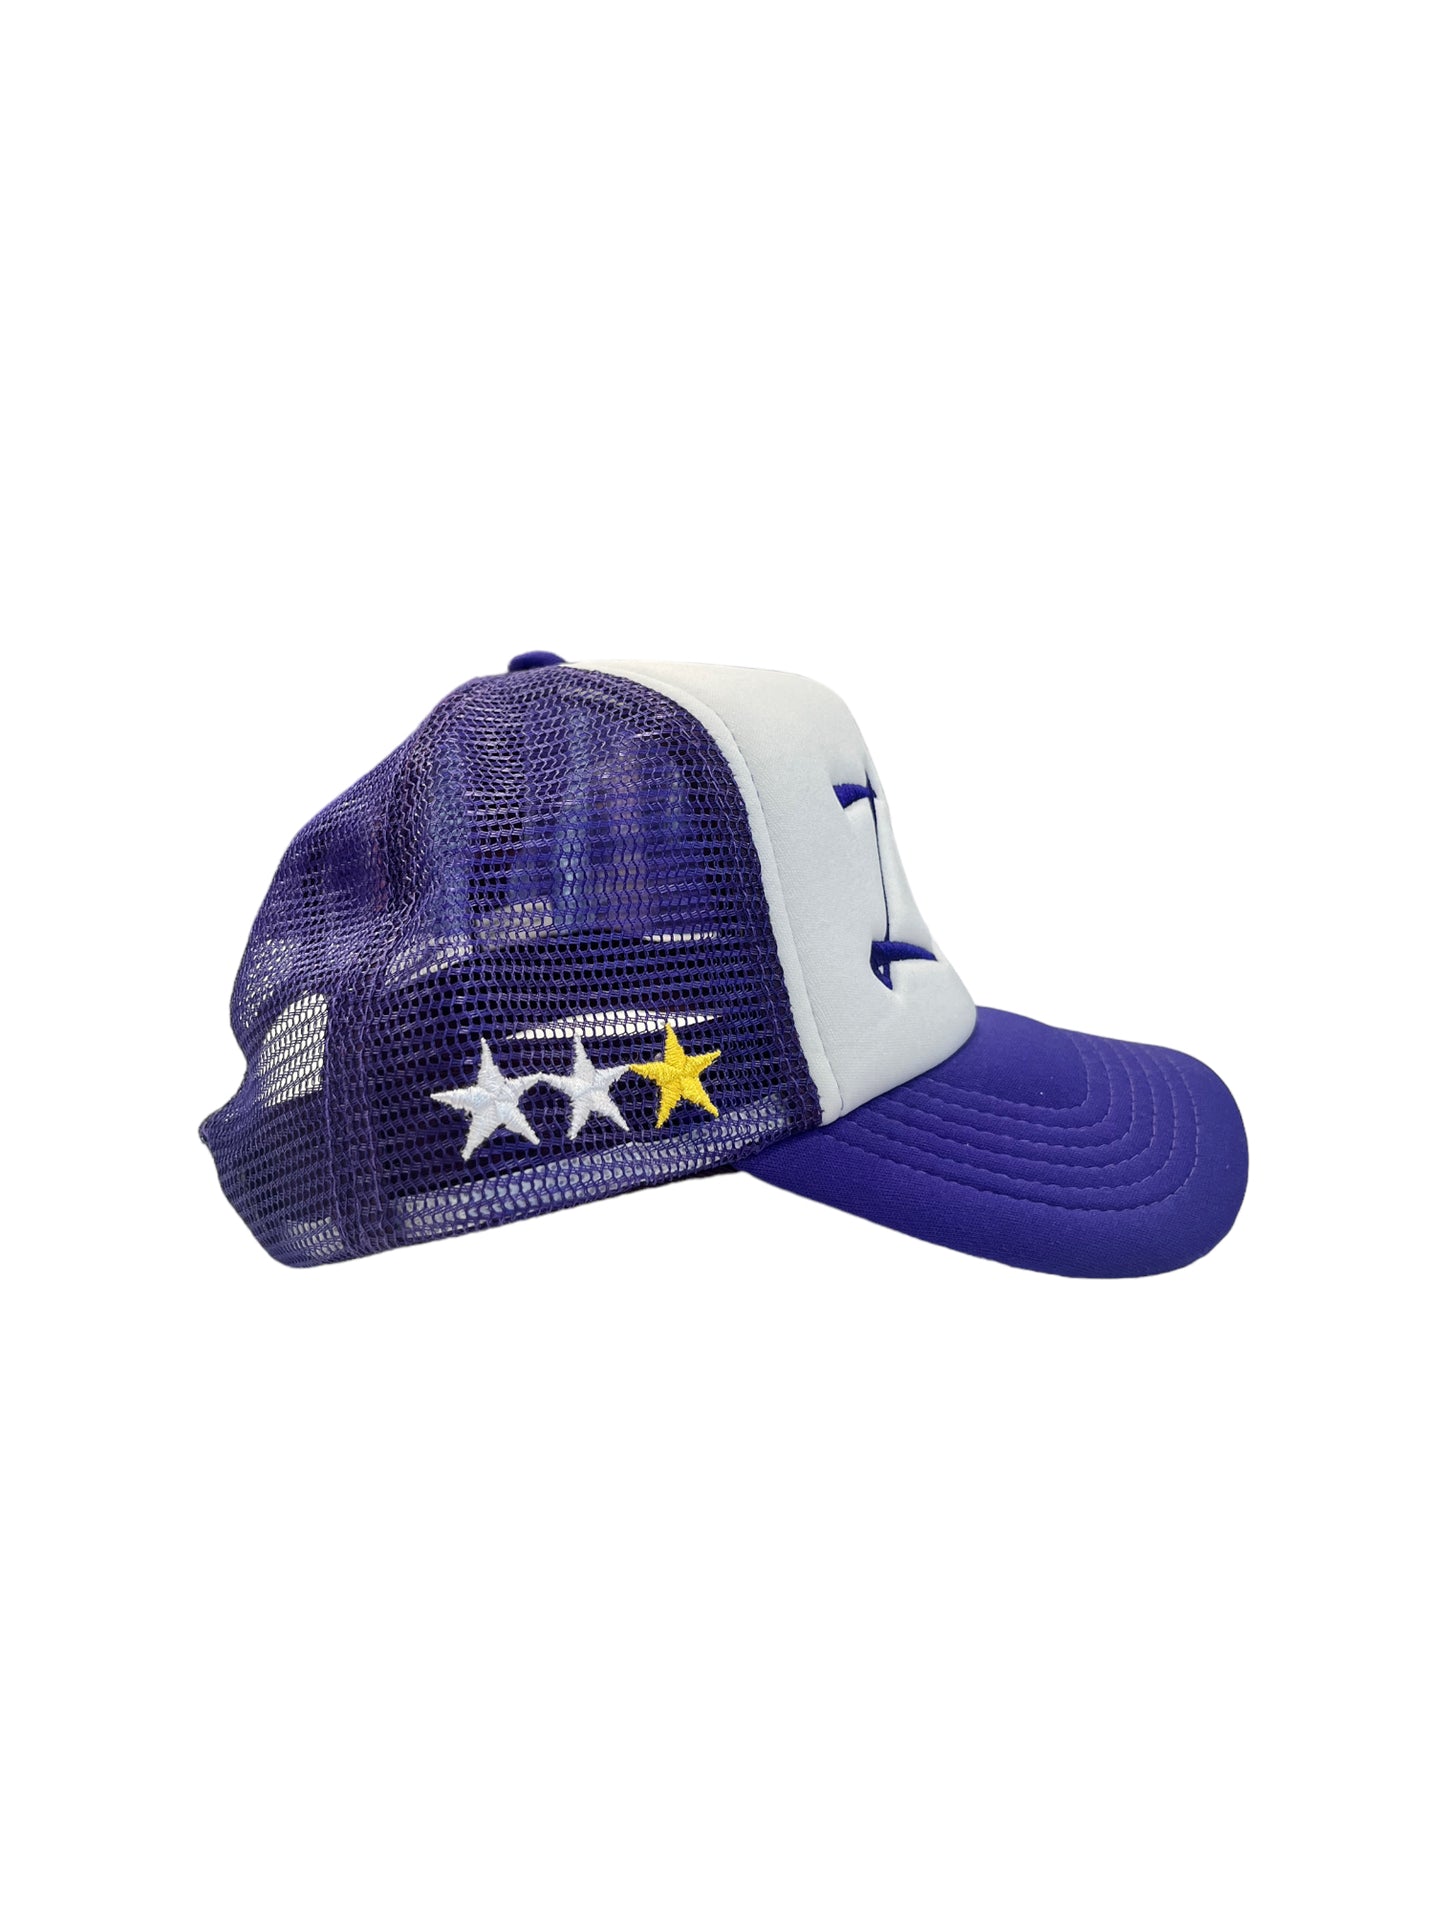 First Avenue Trucker Hat (White and Purple)